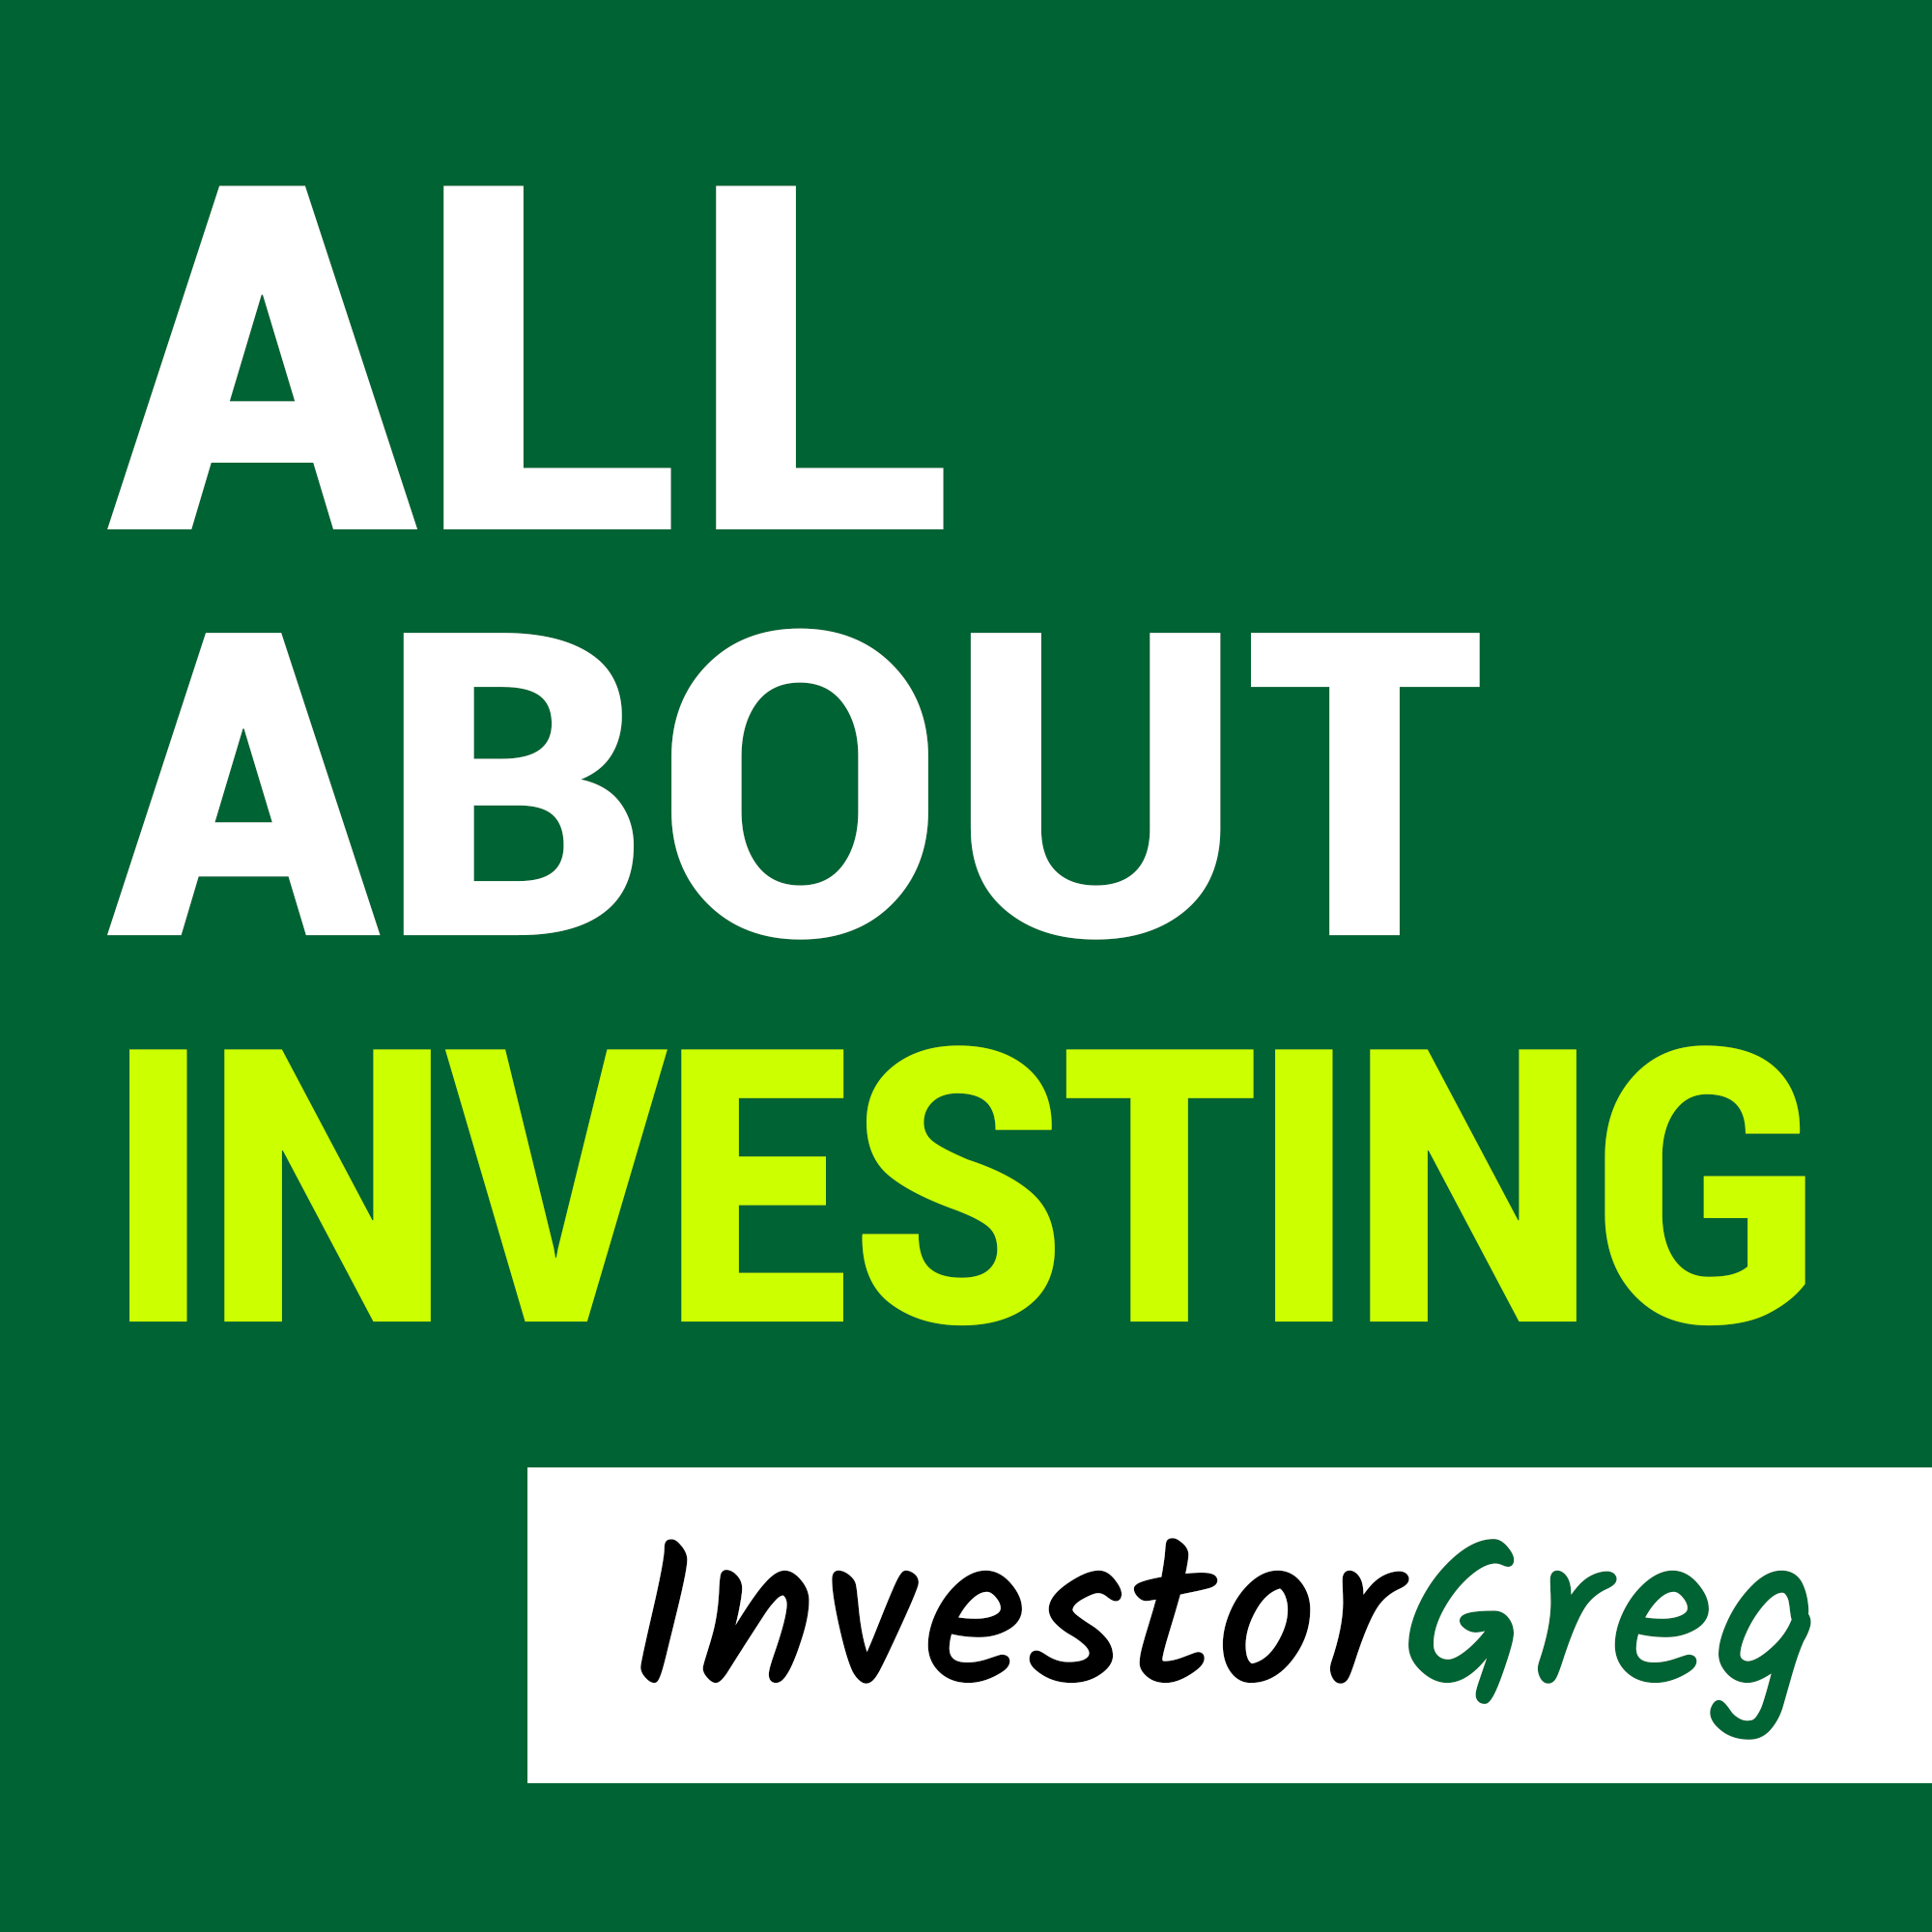 All About Investing - InvestorGreg Podcast